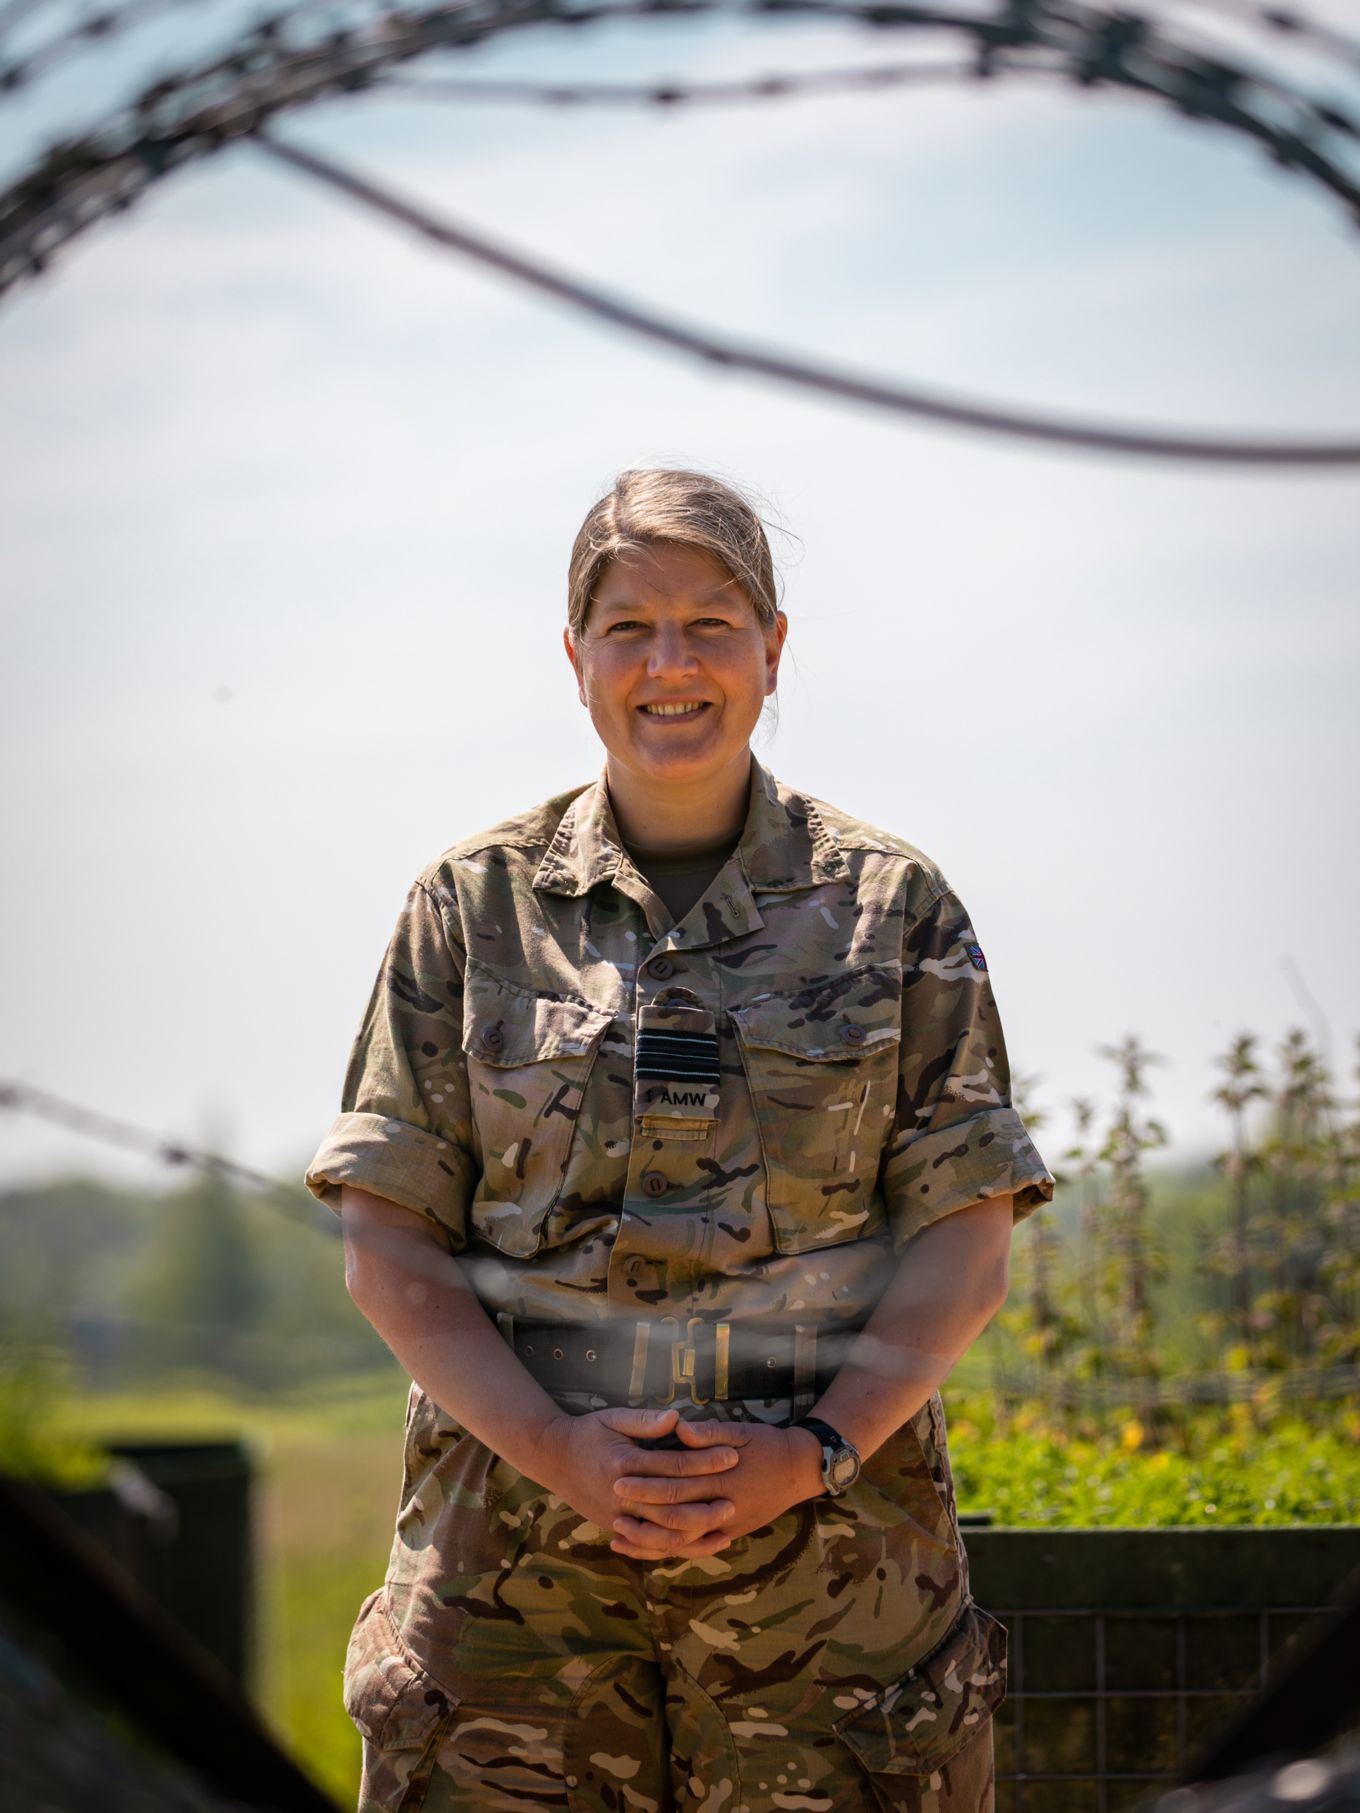 Squadron Leader Katherine Ingram, Deputy Commander of No 1 Air Mobility Wing.